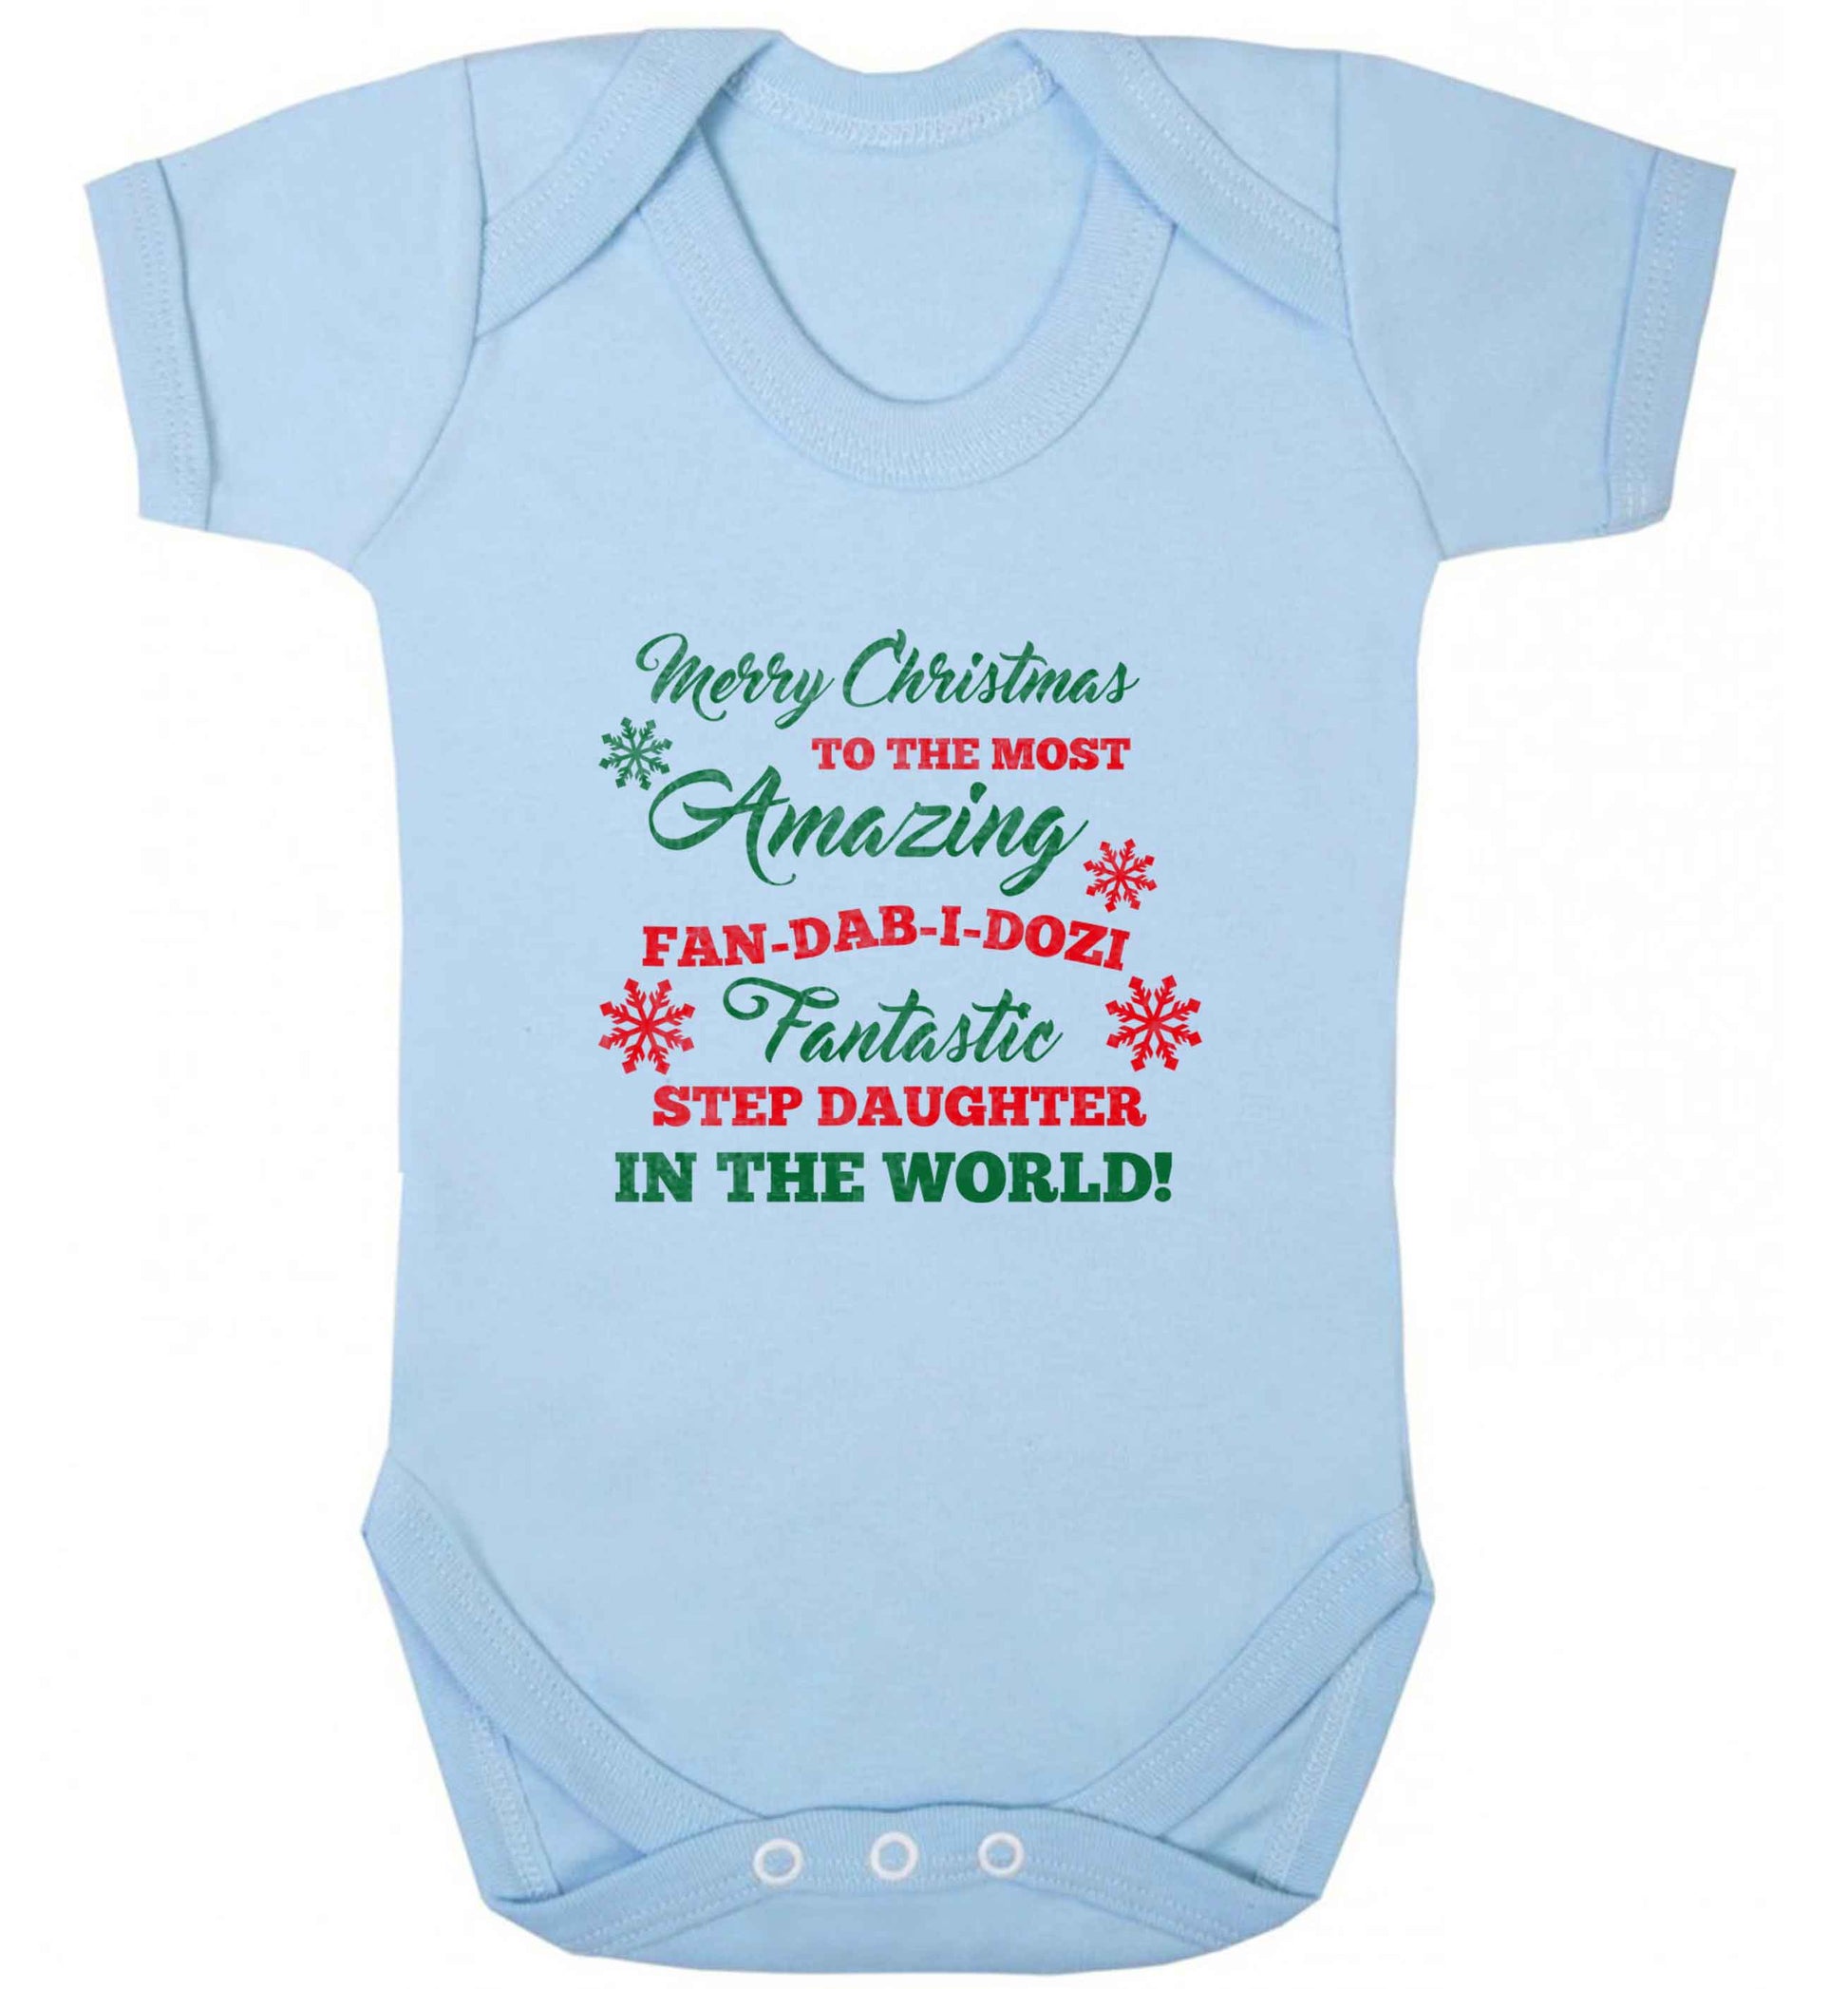 Merry Christmas to the most amazing fan-dab-i-dozi fantasic Step Daughter in the world baby vest pale blue 18-24 months